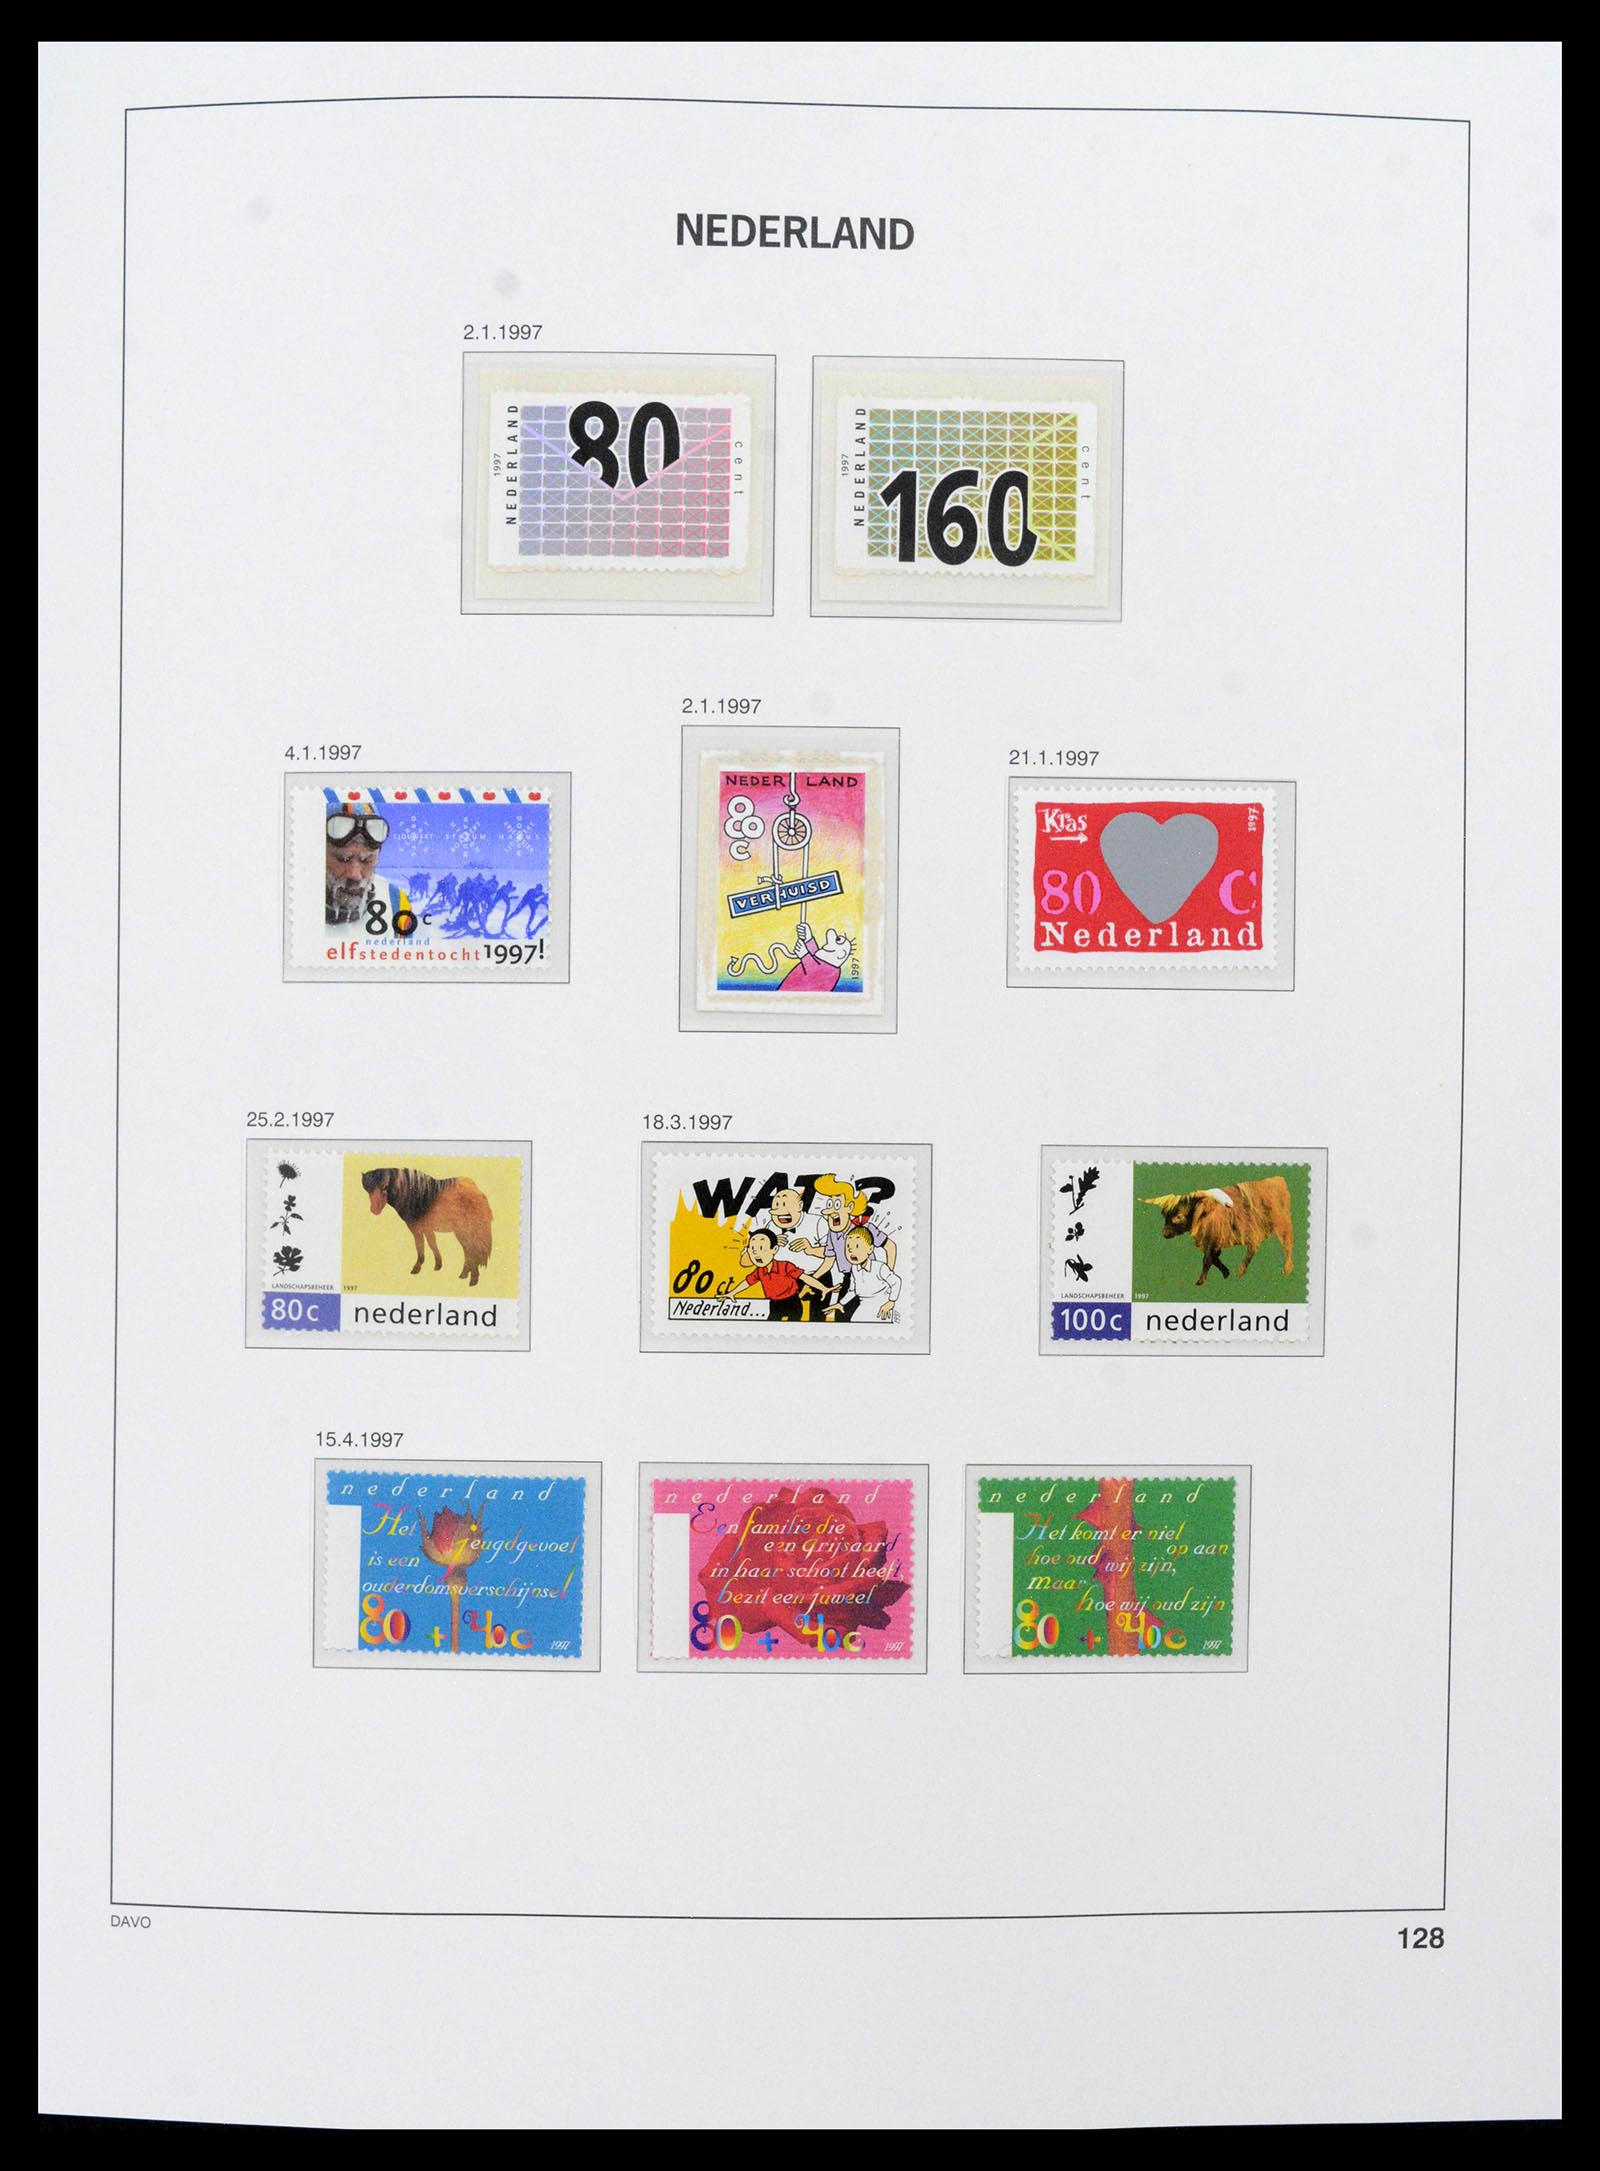 39364 0005 - Stamp collection 39364 Netherlands 1996-2021!